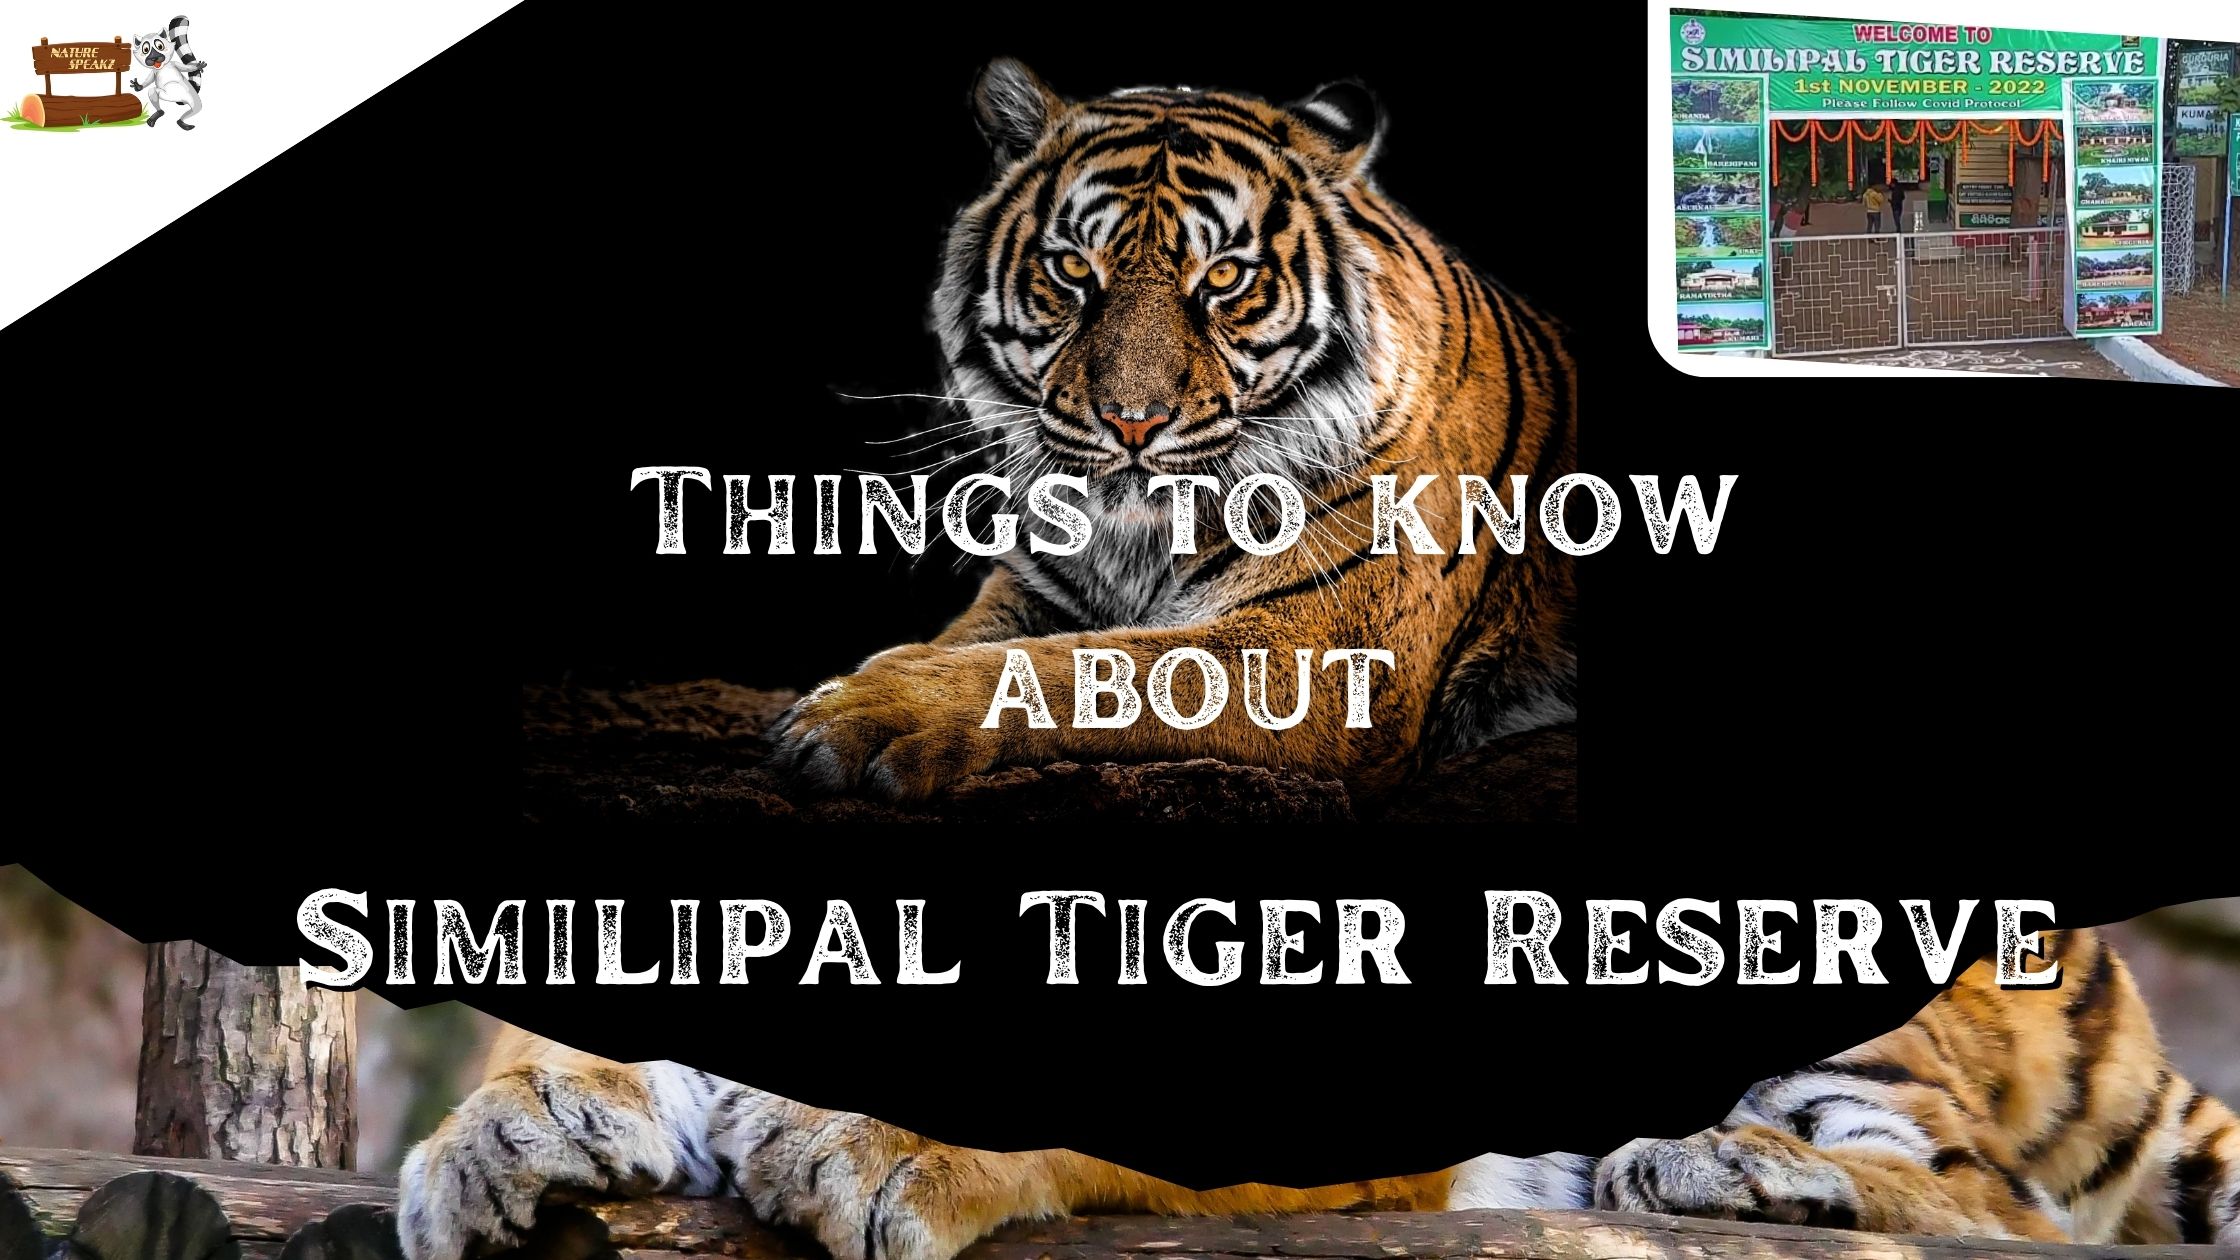 Things to know about Similipal Tiger Reserve